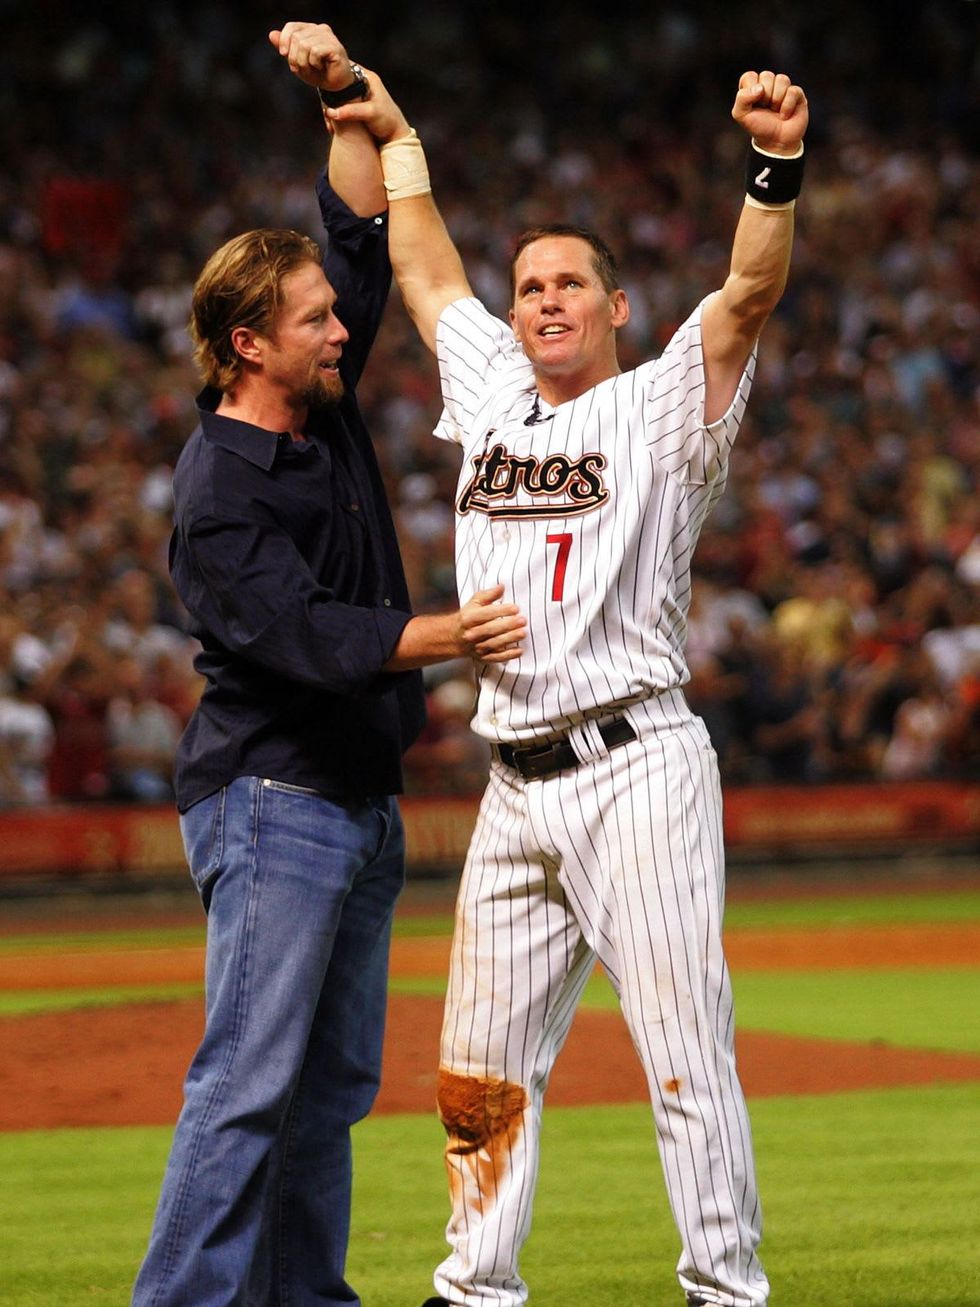 Oh, so close! Craig Biggio barely misses out on Baseball Hall of